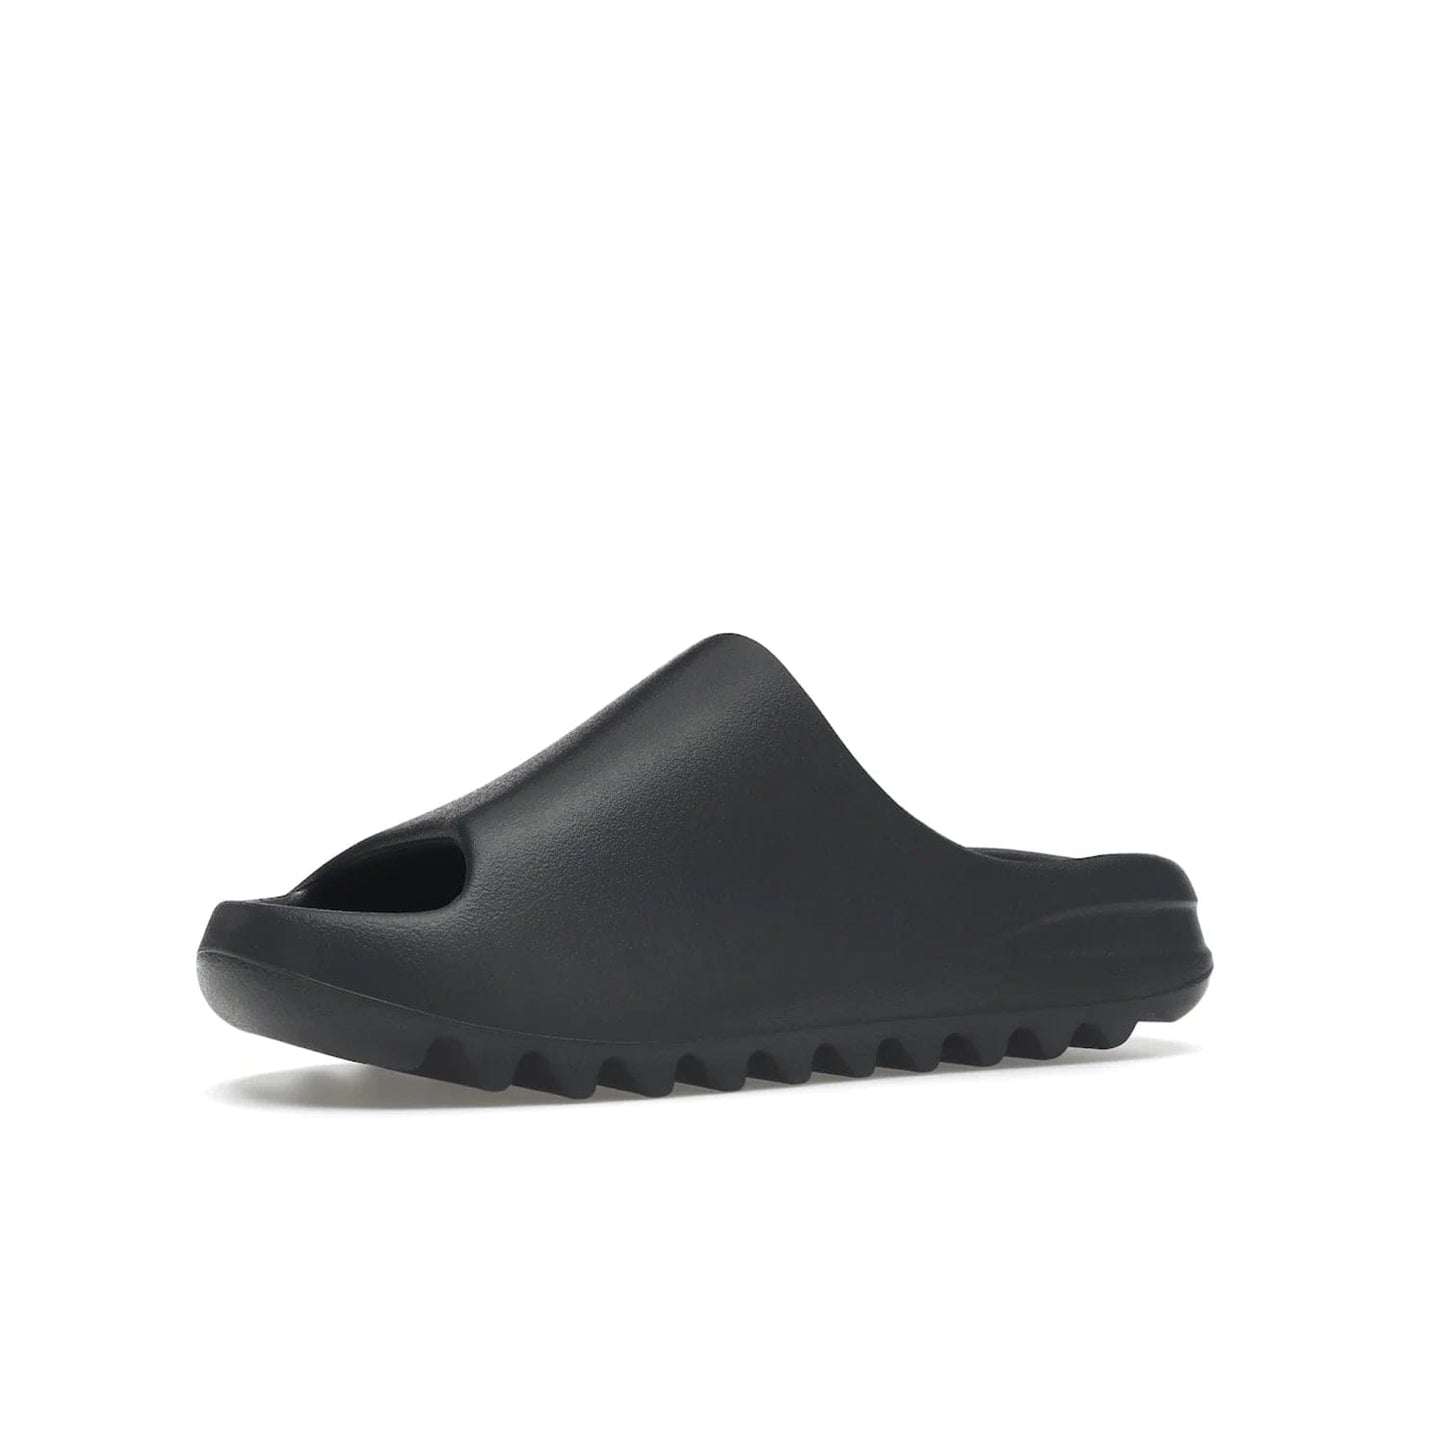 adidas Yeezy Slide Slate Grey - Image 16 - Only at www.BallersClubKickz.com - Stylish & comfortable adidas Yeezy Slide Slate Grey features an EVA foam upper, strategic cutouts, textured outsole pattern, & easy slip-on design for modern comfort & classic style.